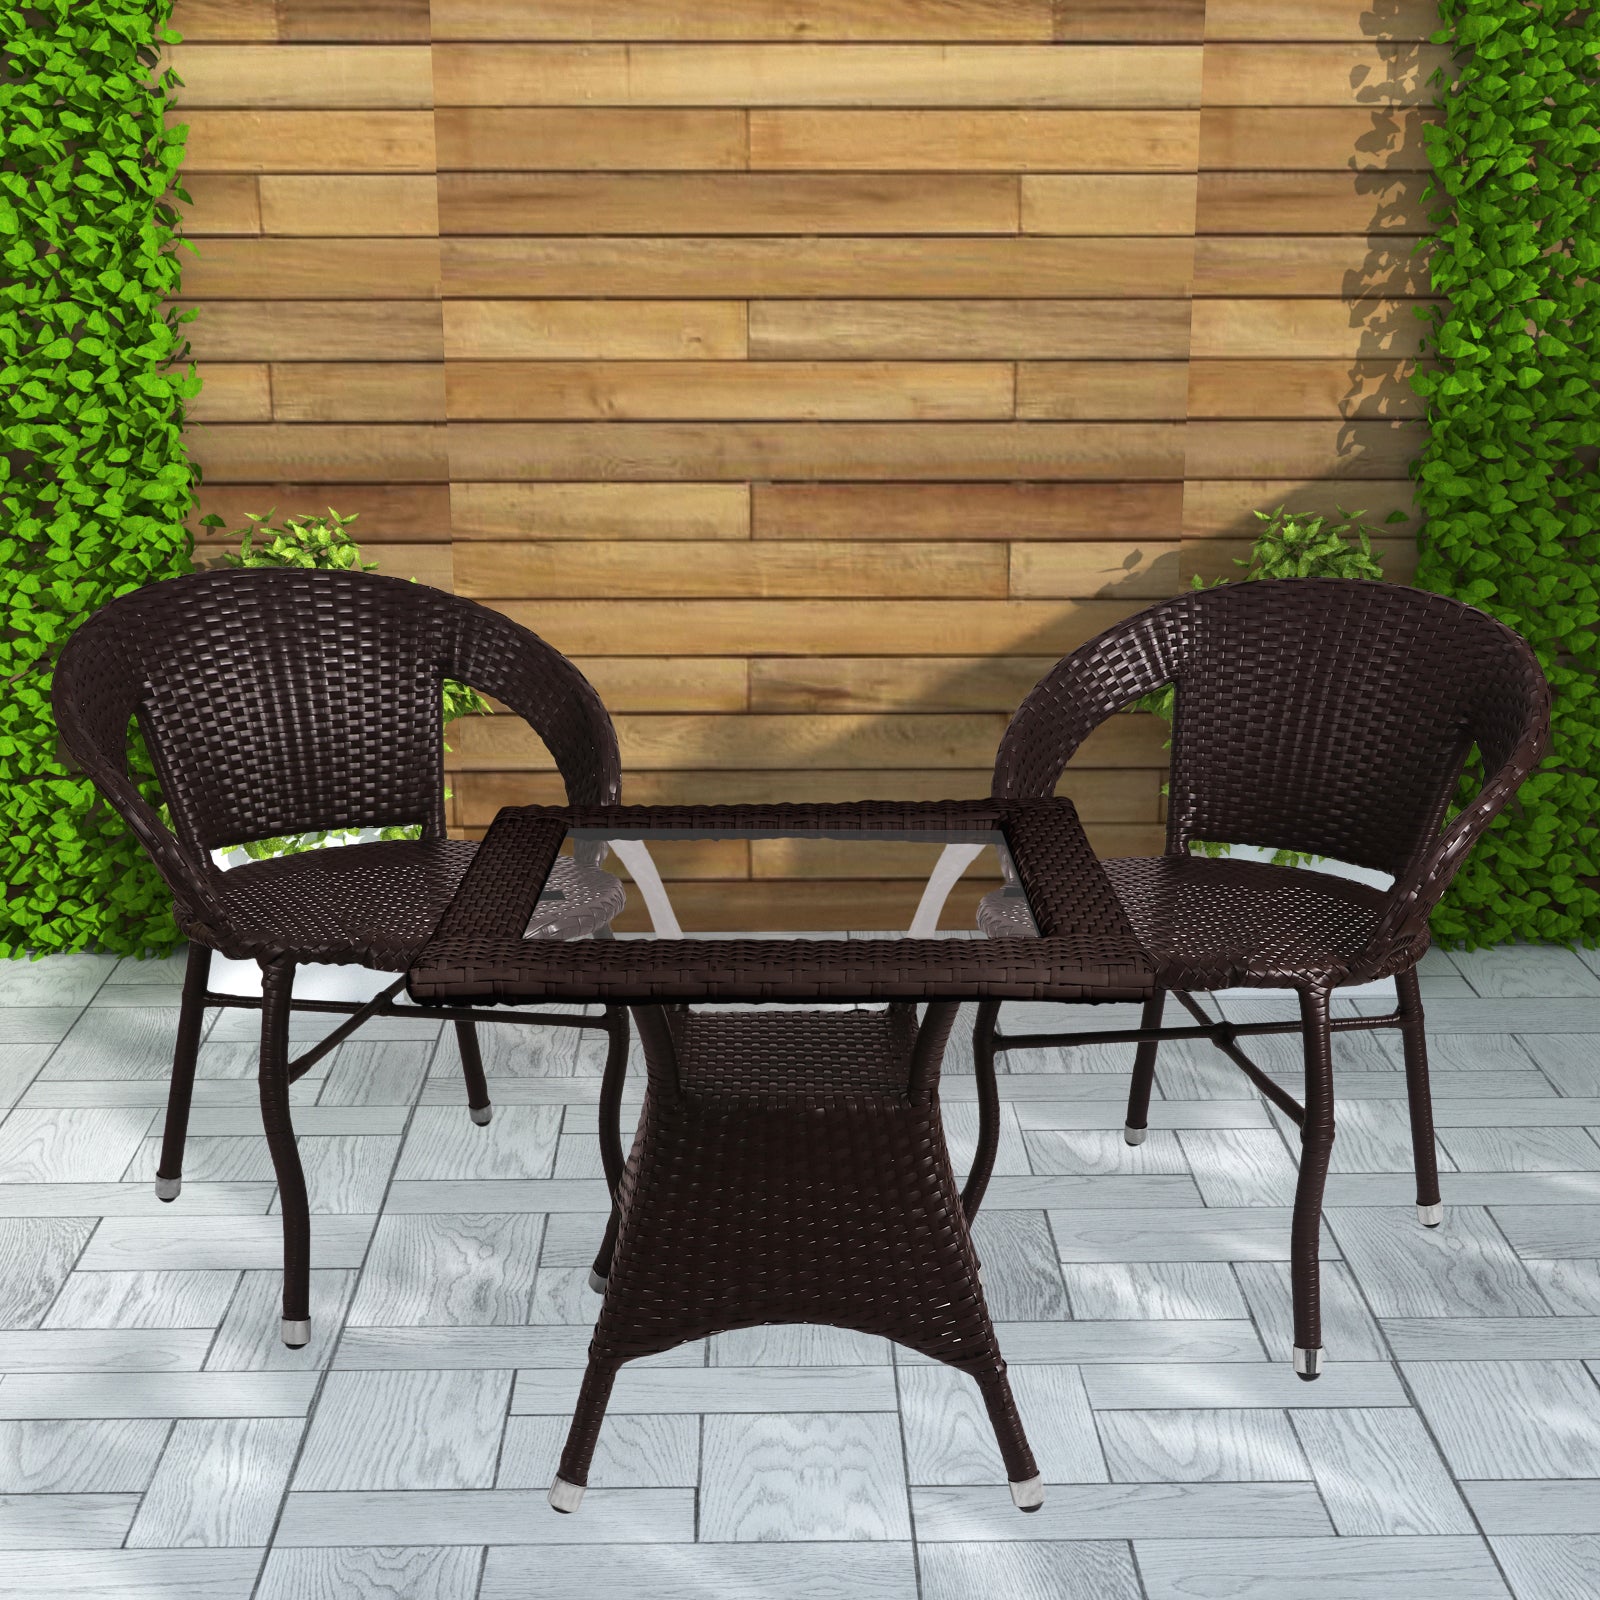 Hapit Outdoor Patio Seating Set 2 Chairs and 1 Table Set (Brown)